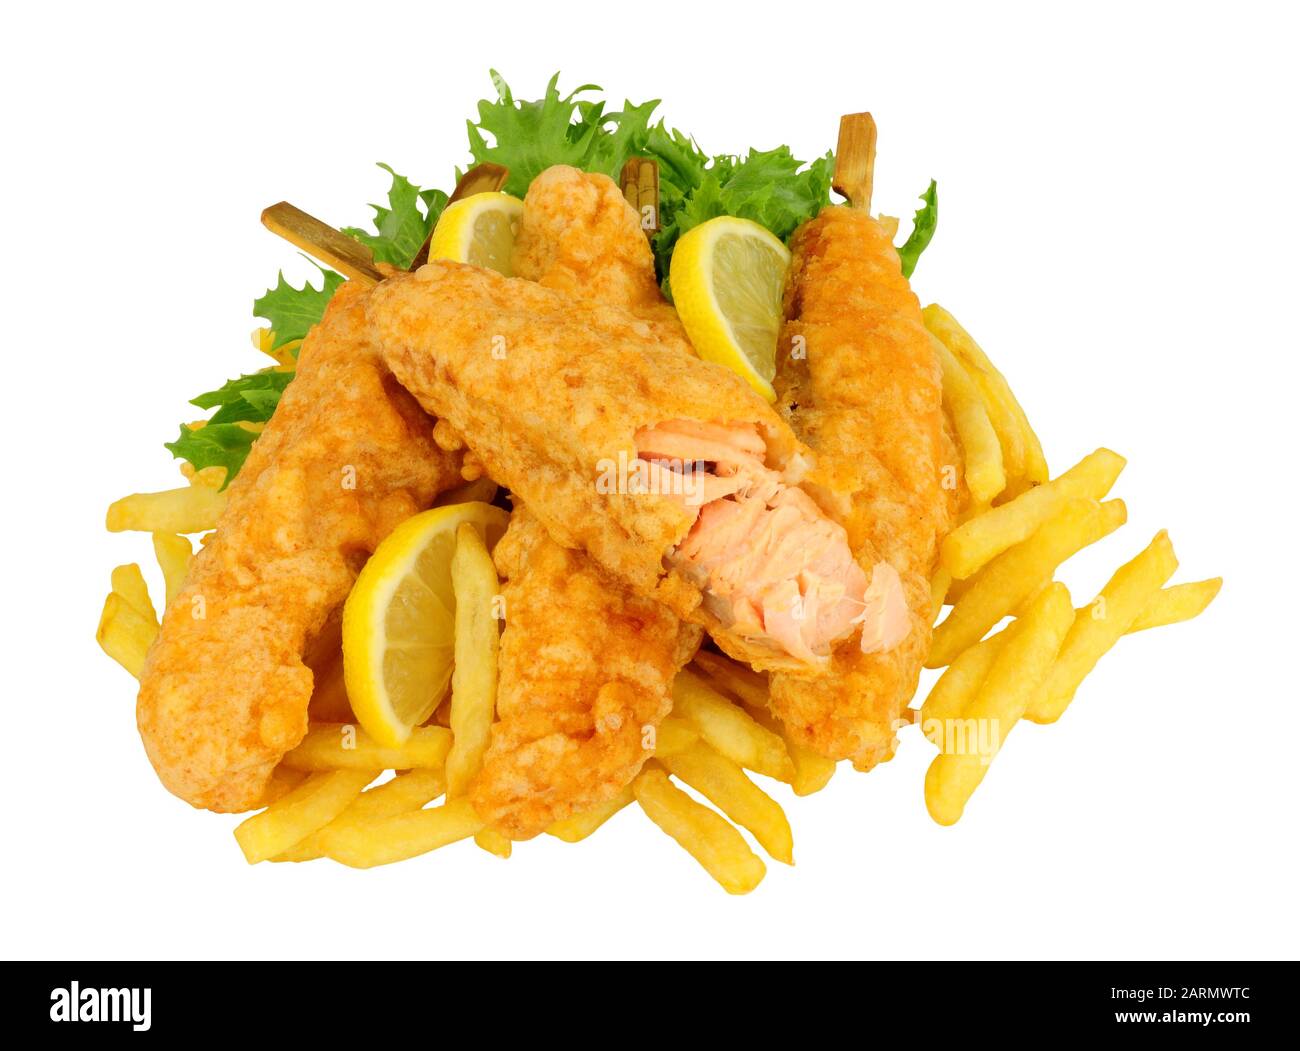 Battered salmon fish fillets on wooden skewers with French Fries isolated on a white background Stock Photo